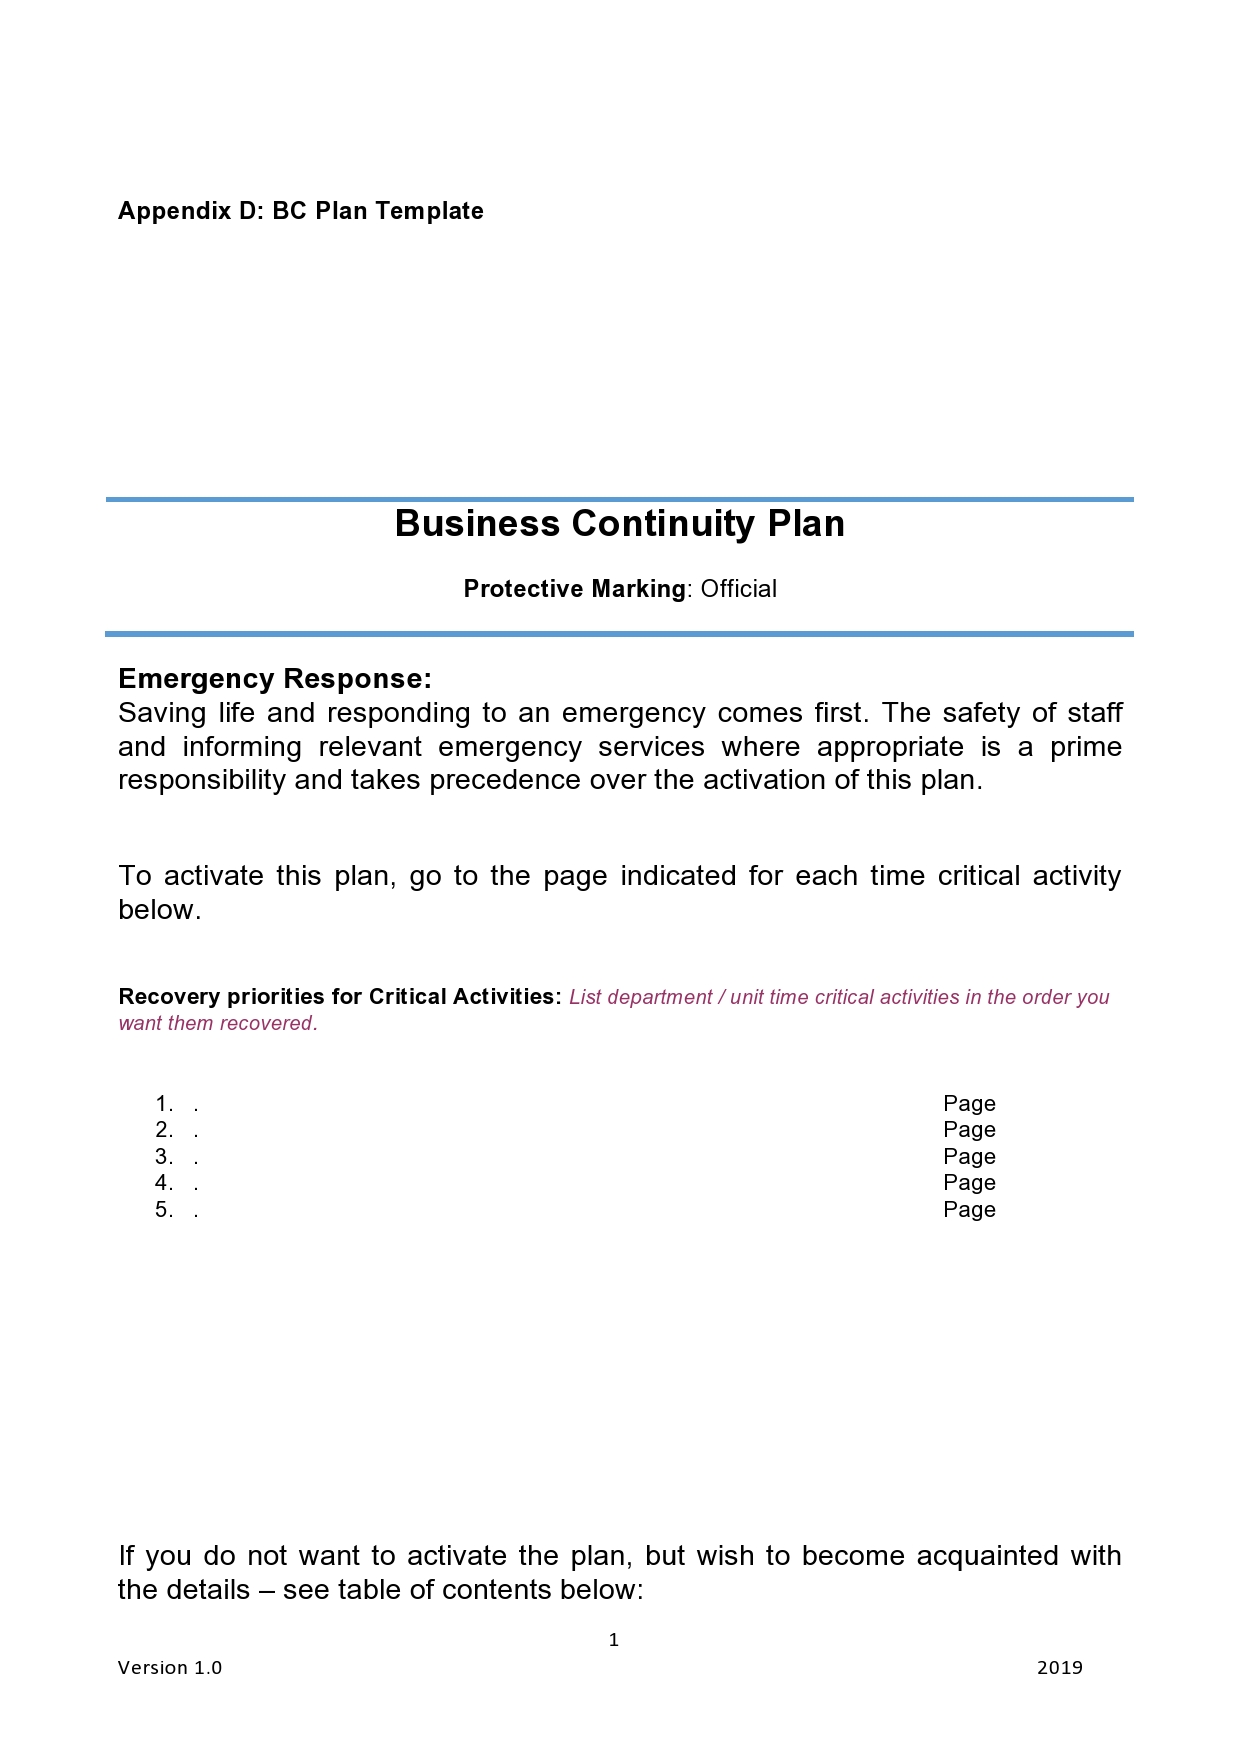 Free business continuity plan template 19